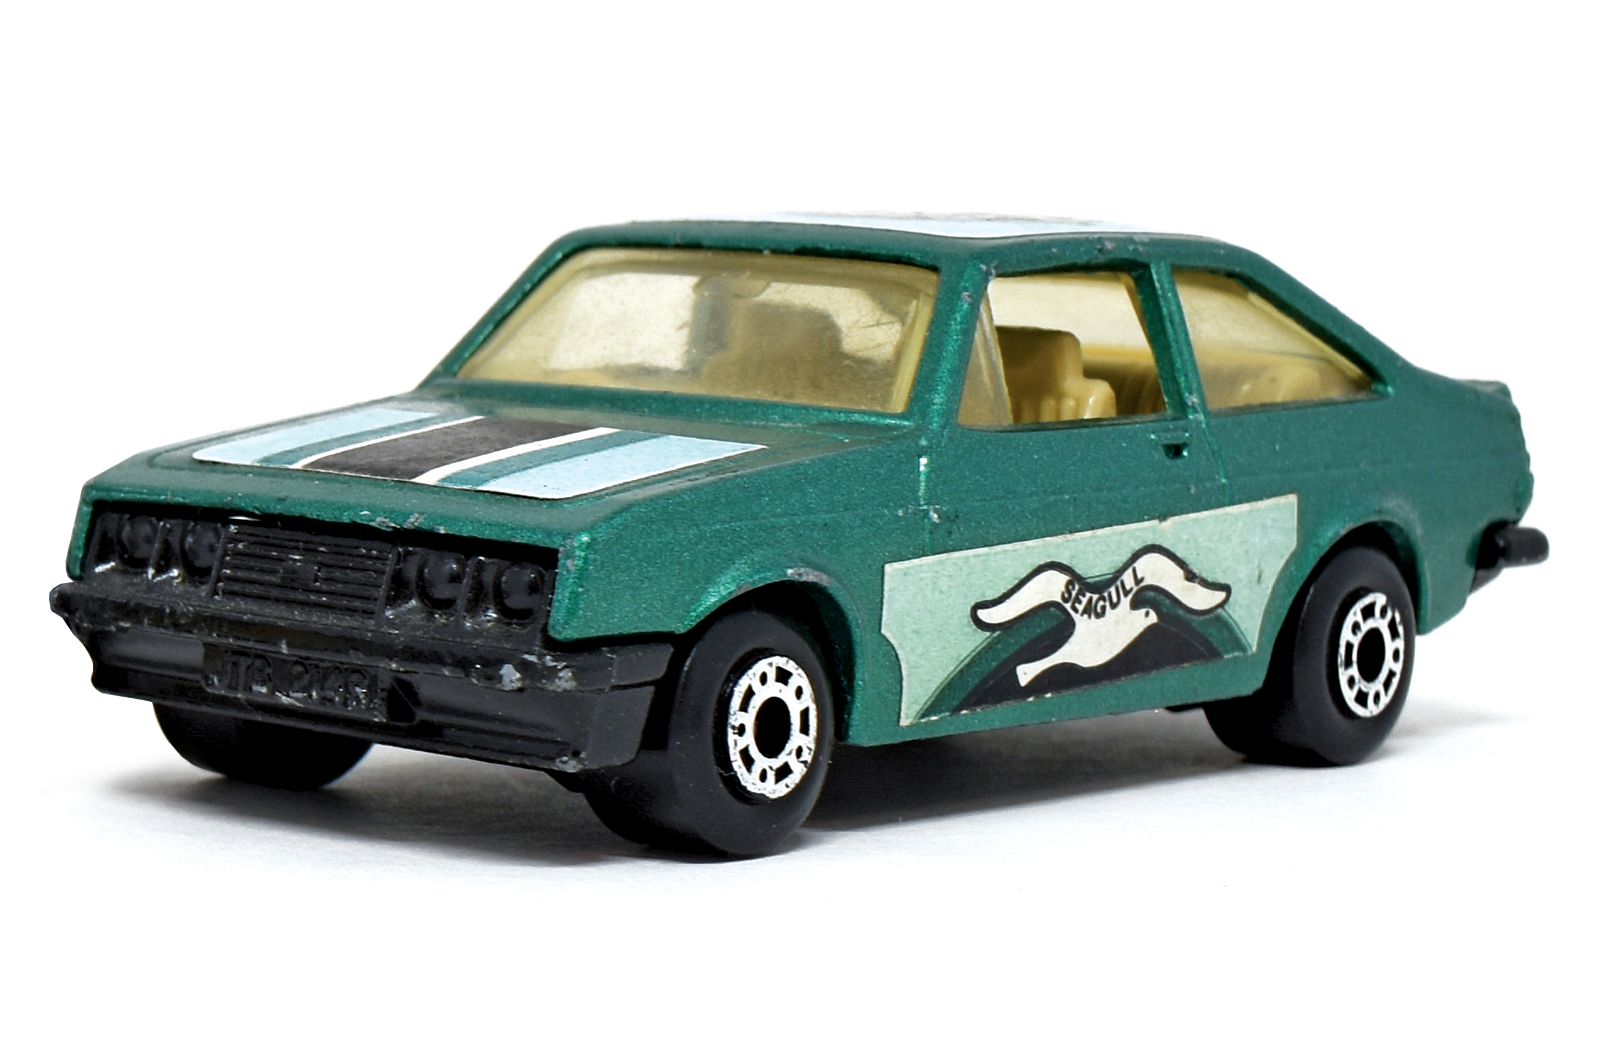 Classic & Sports Car – Matchbox at 70: small, but perfectly formed